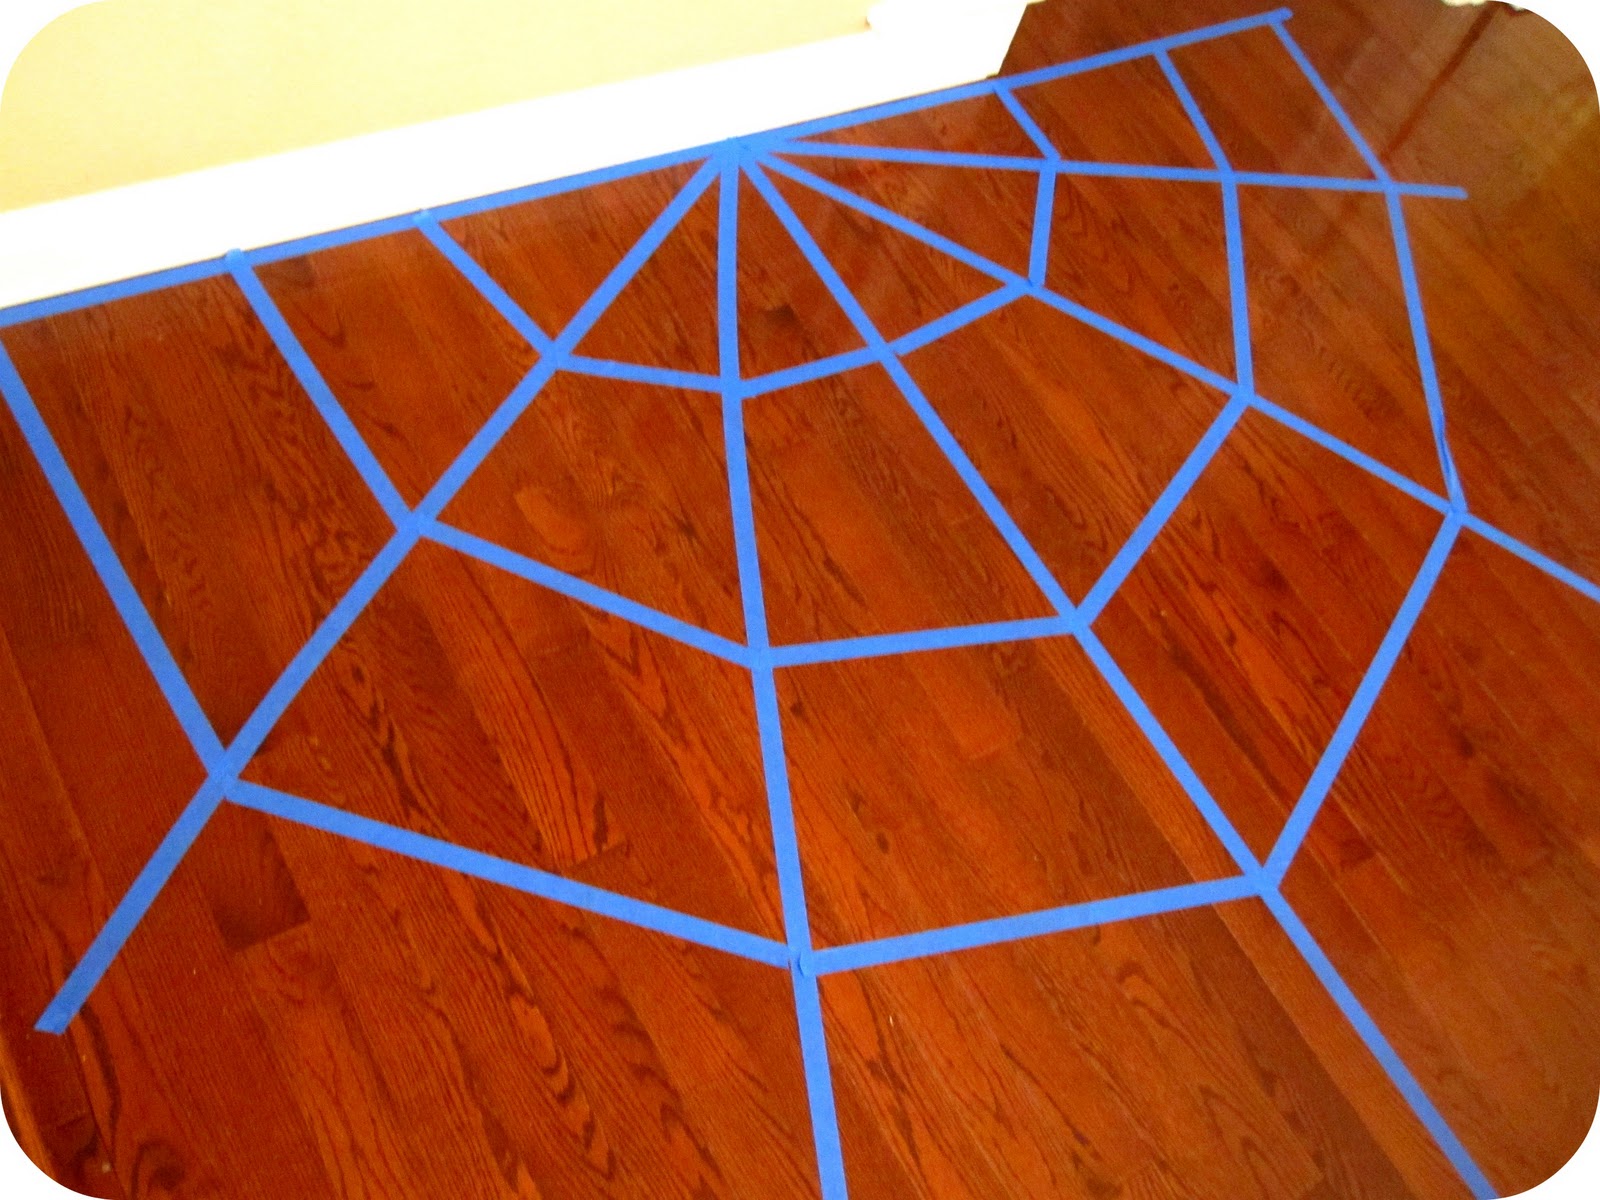 Toddler Approved!: Sight Word Spider Web